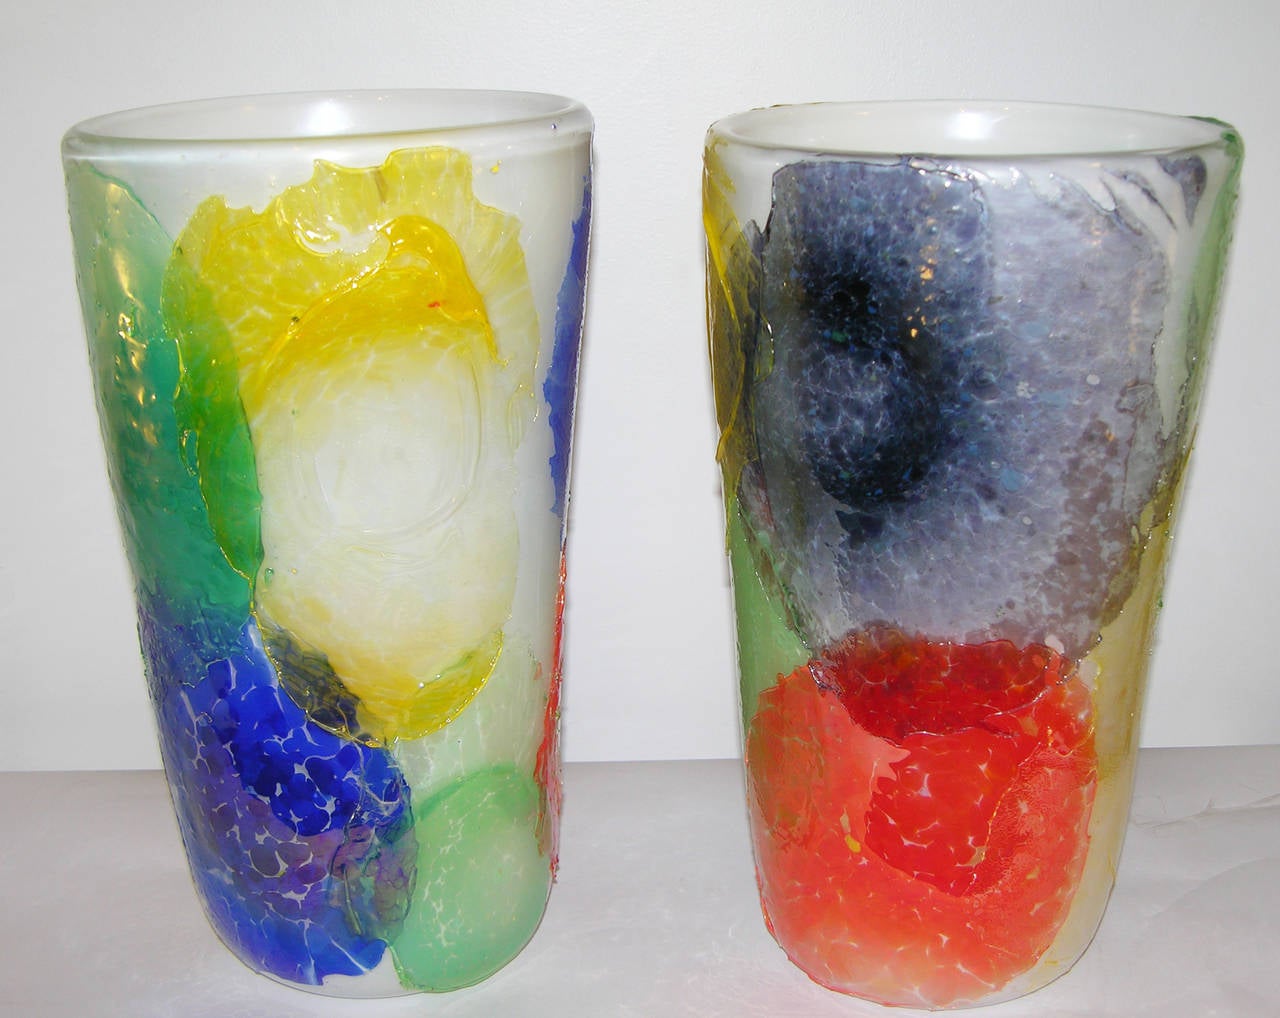 Striking Pair of Murano Glass Vases Decorated with Colorful Iridescent Disks 2